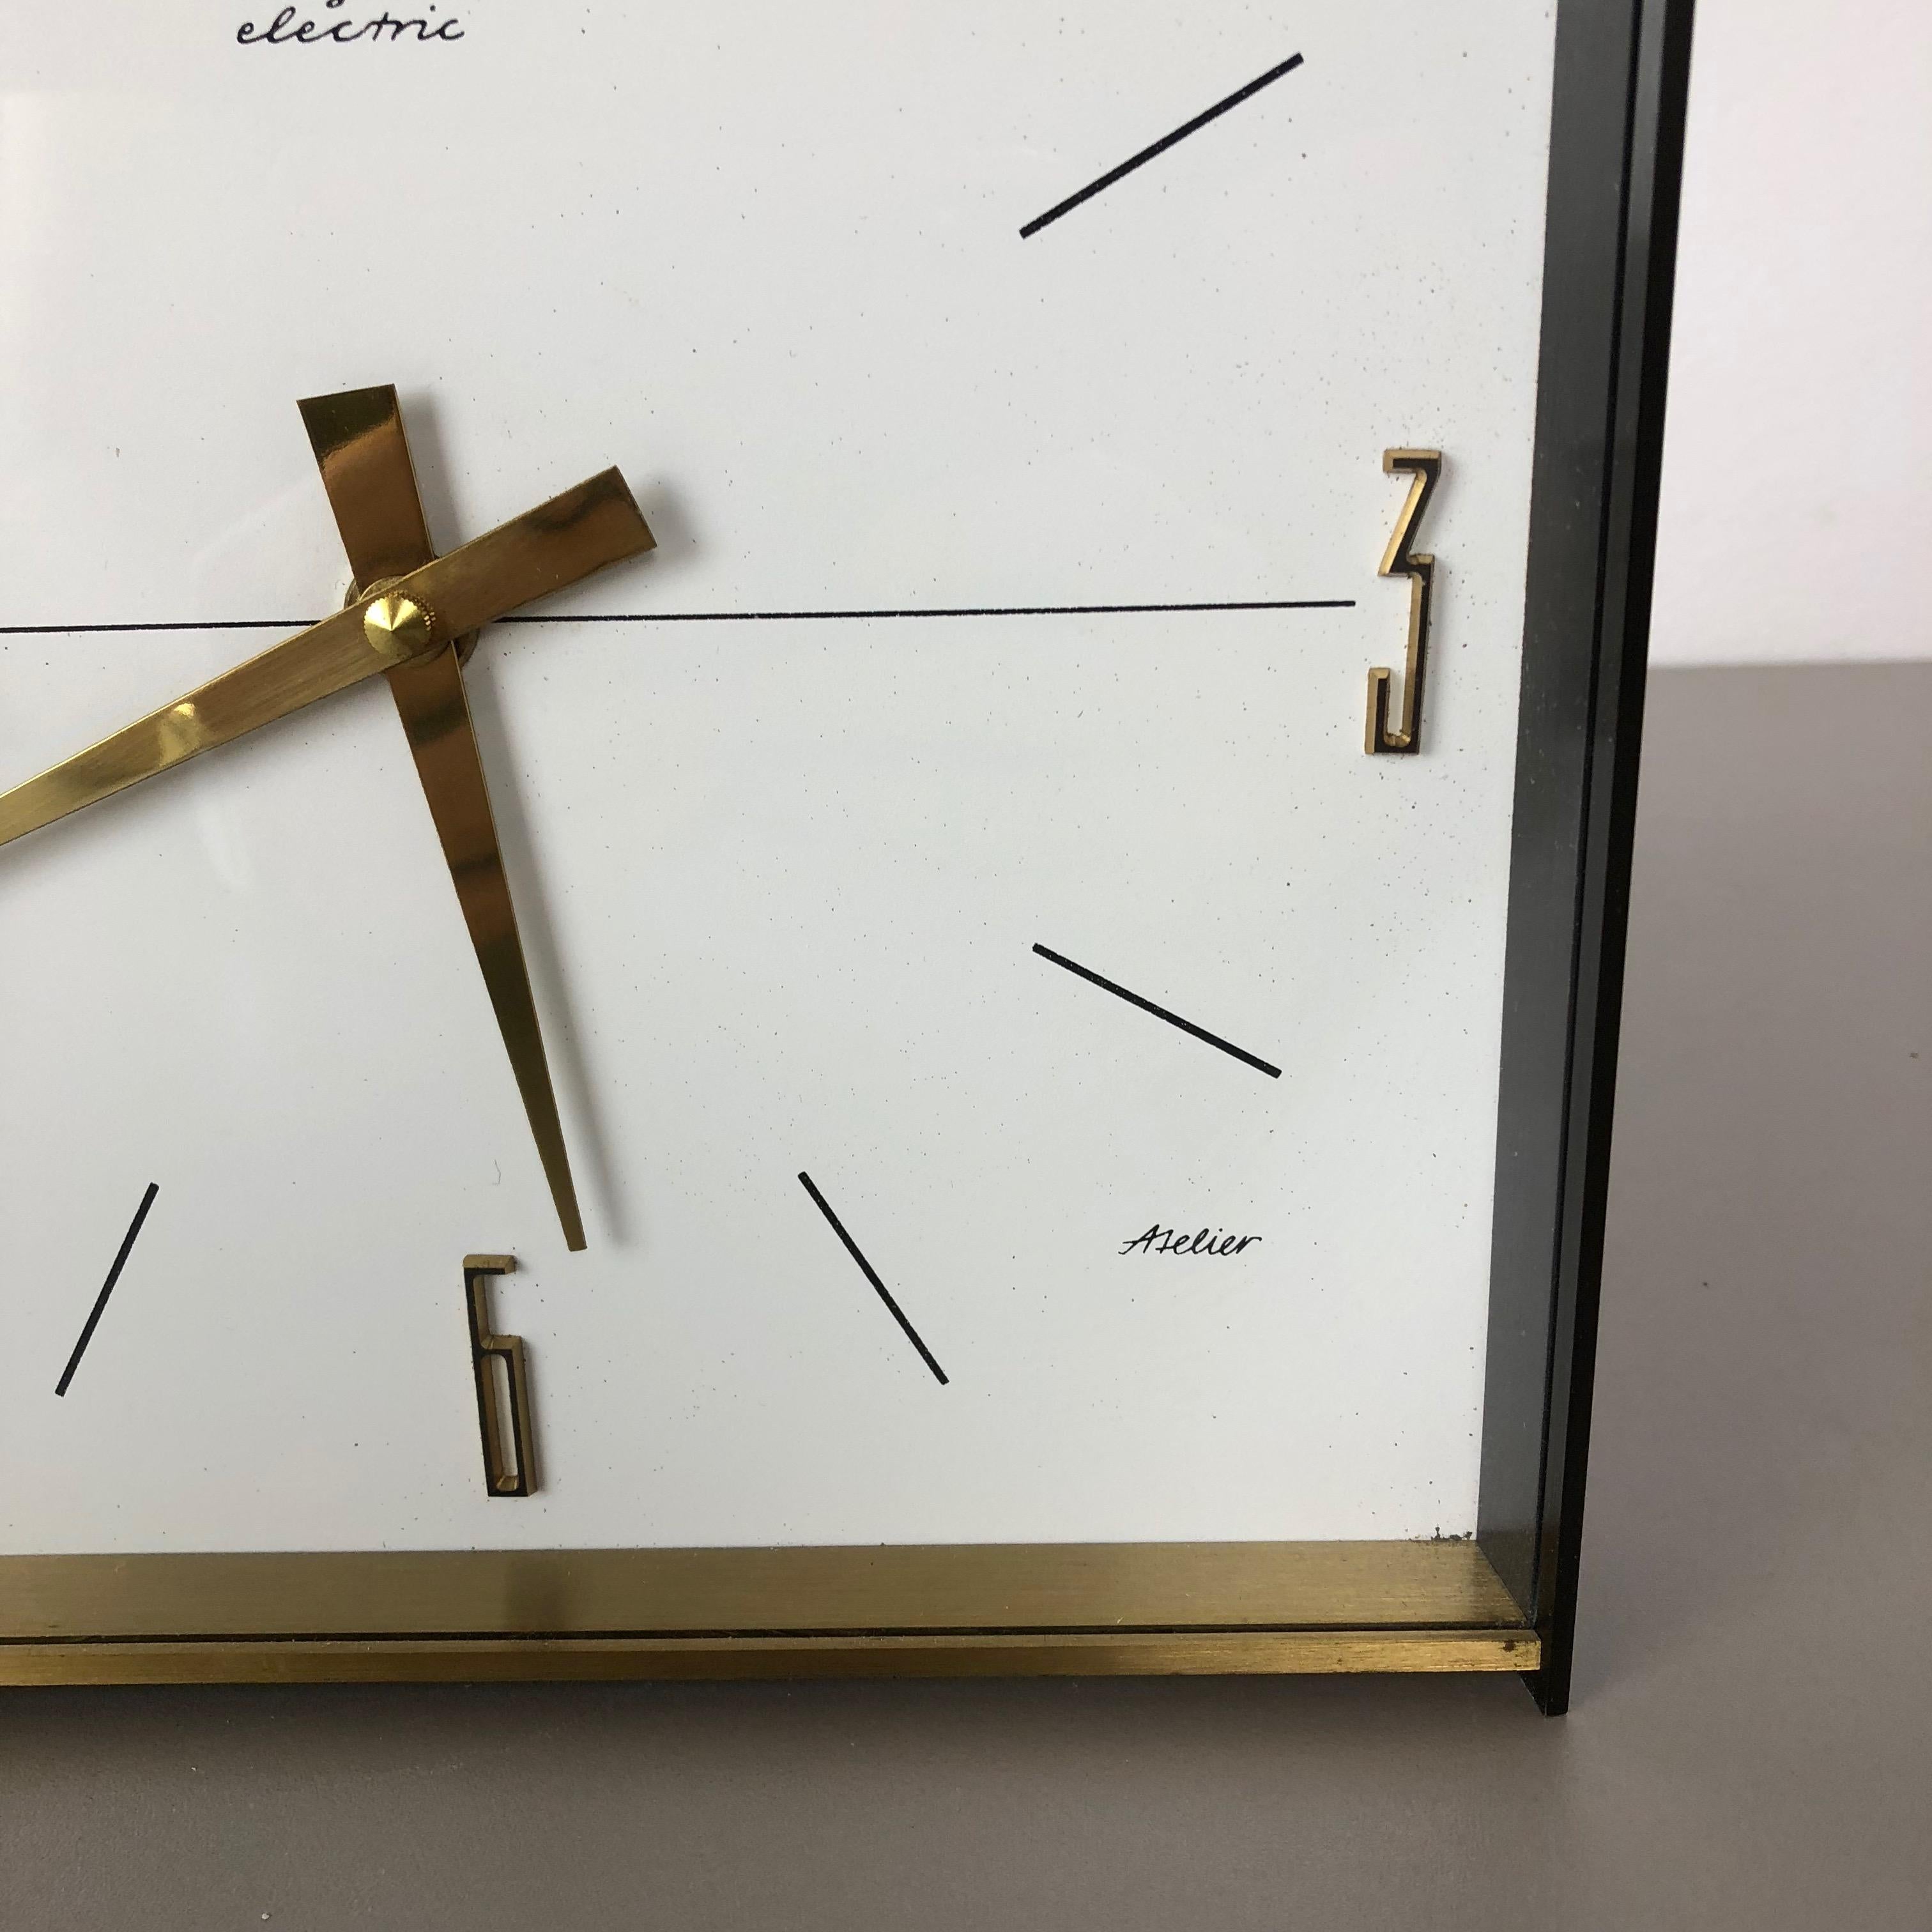 20th Century Vintage 1960s Hollywood Regency Brass Wall Table Clock Dugena Electric, Germany